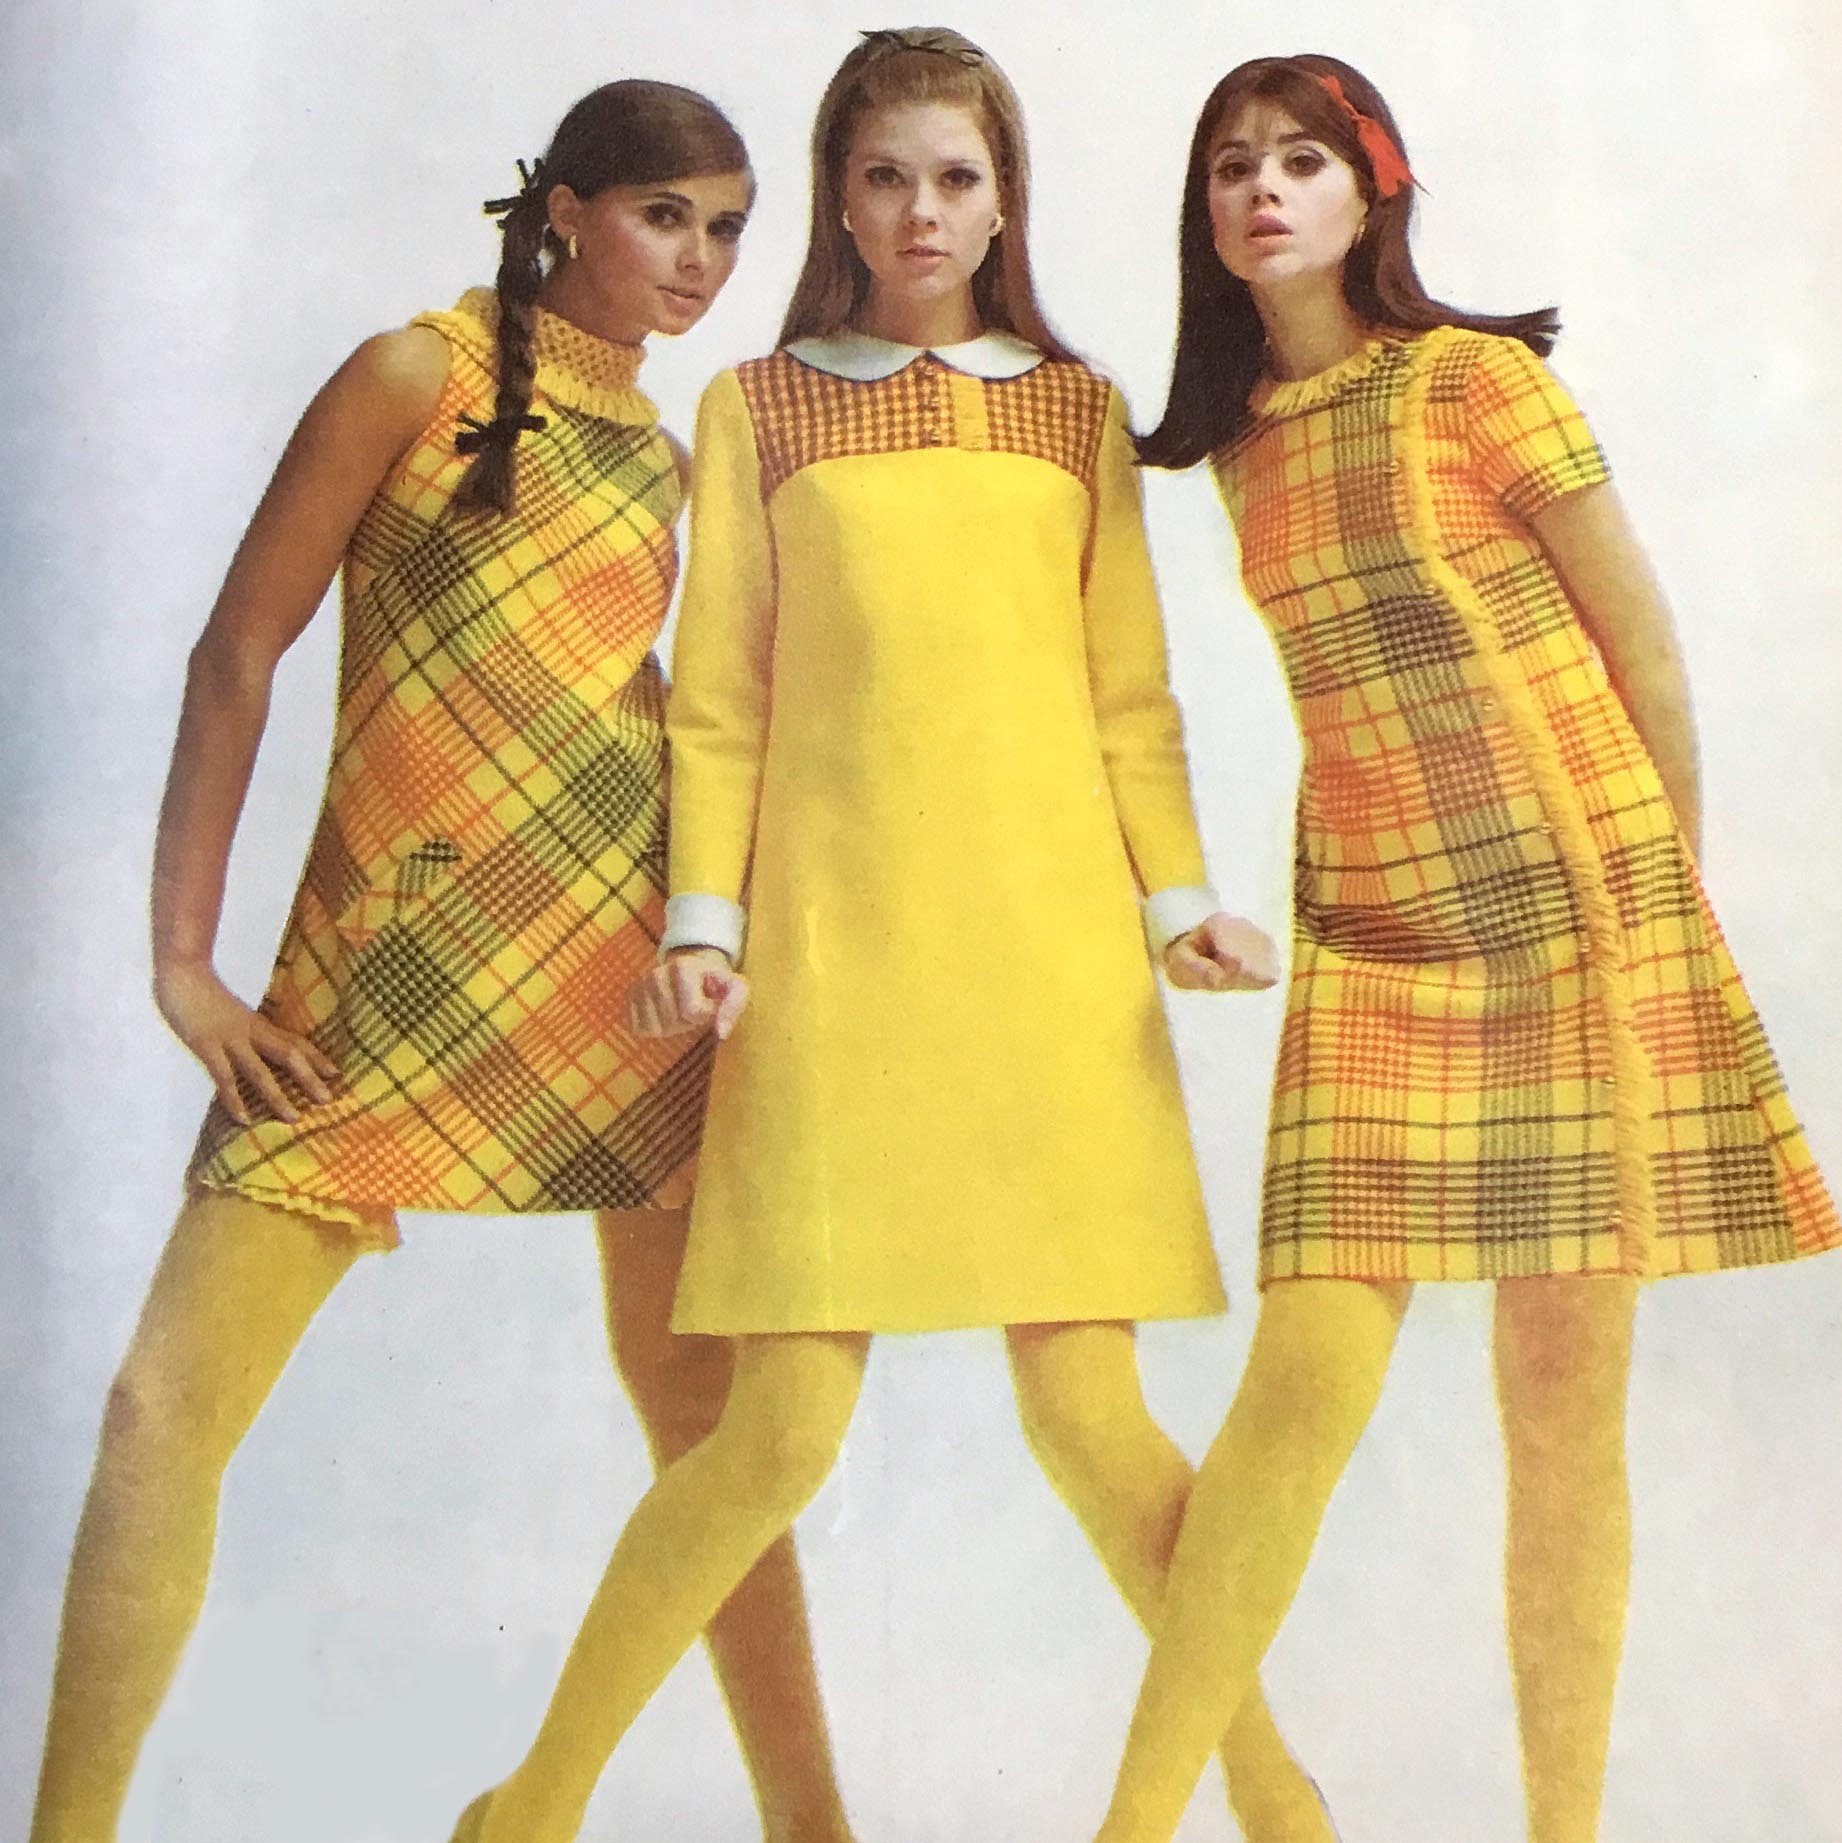 Swinging Sixties in Auckland - How Quant Sparked Our Boutique Culture